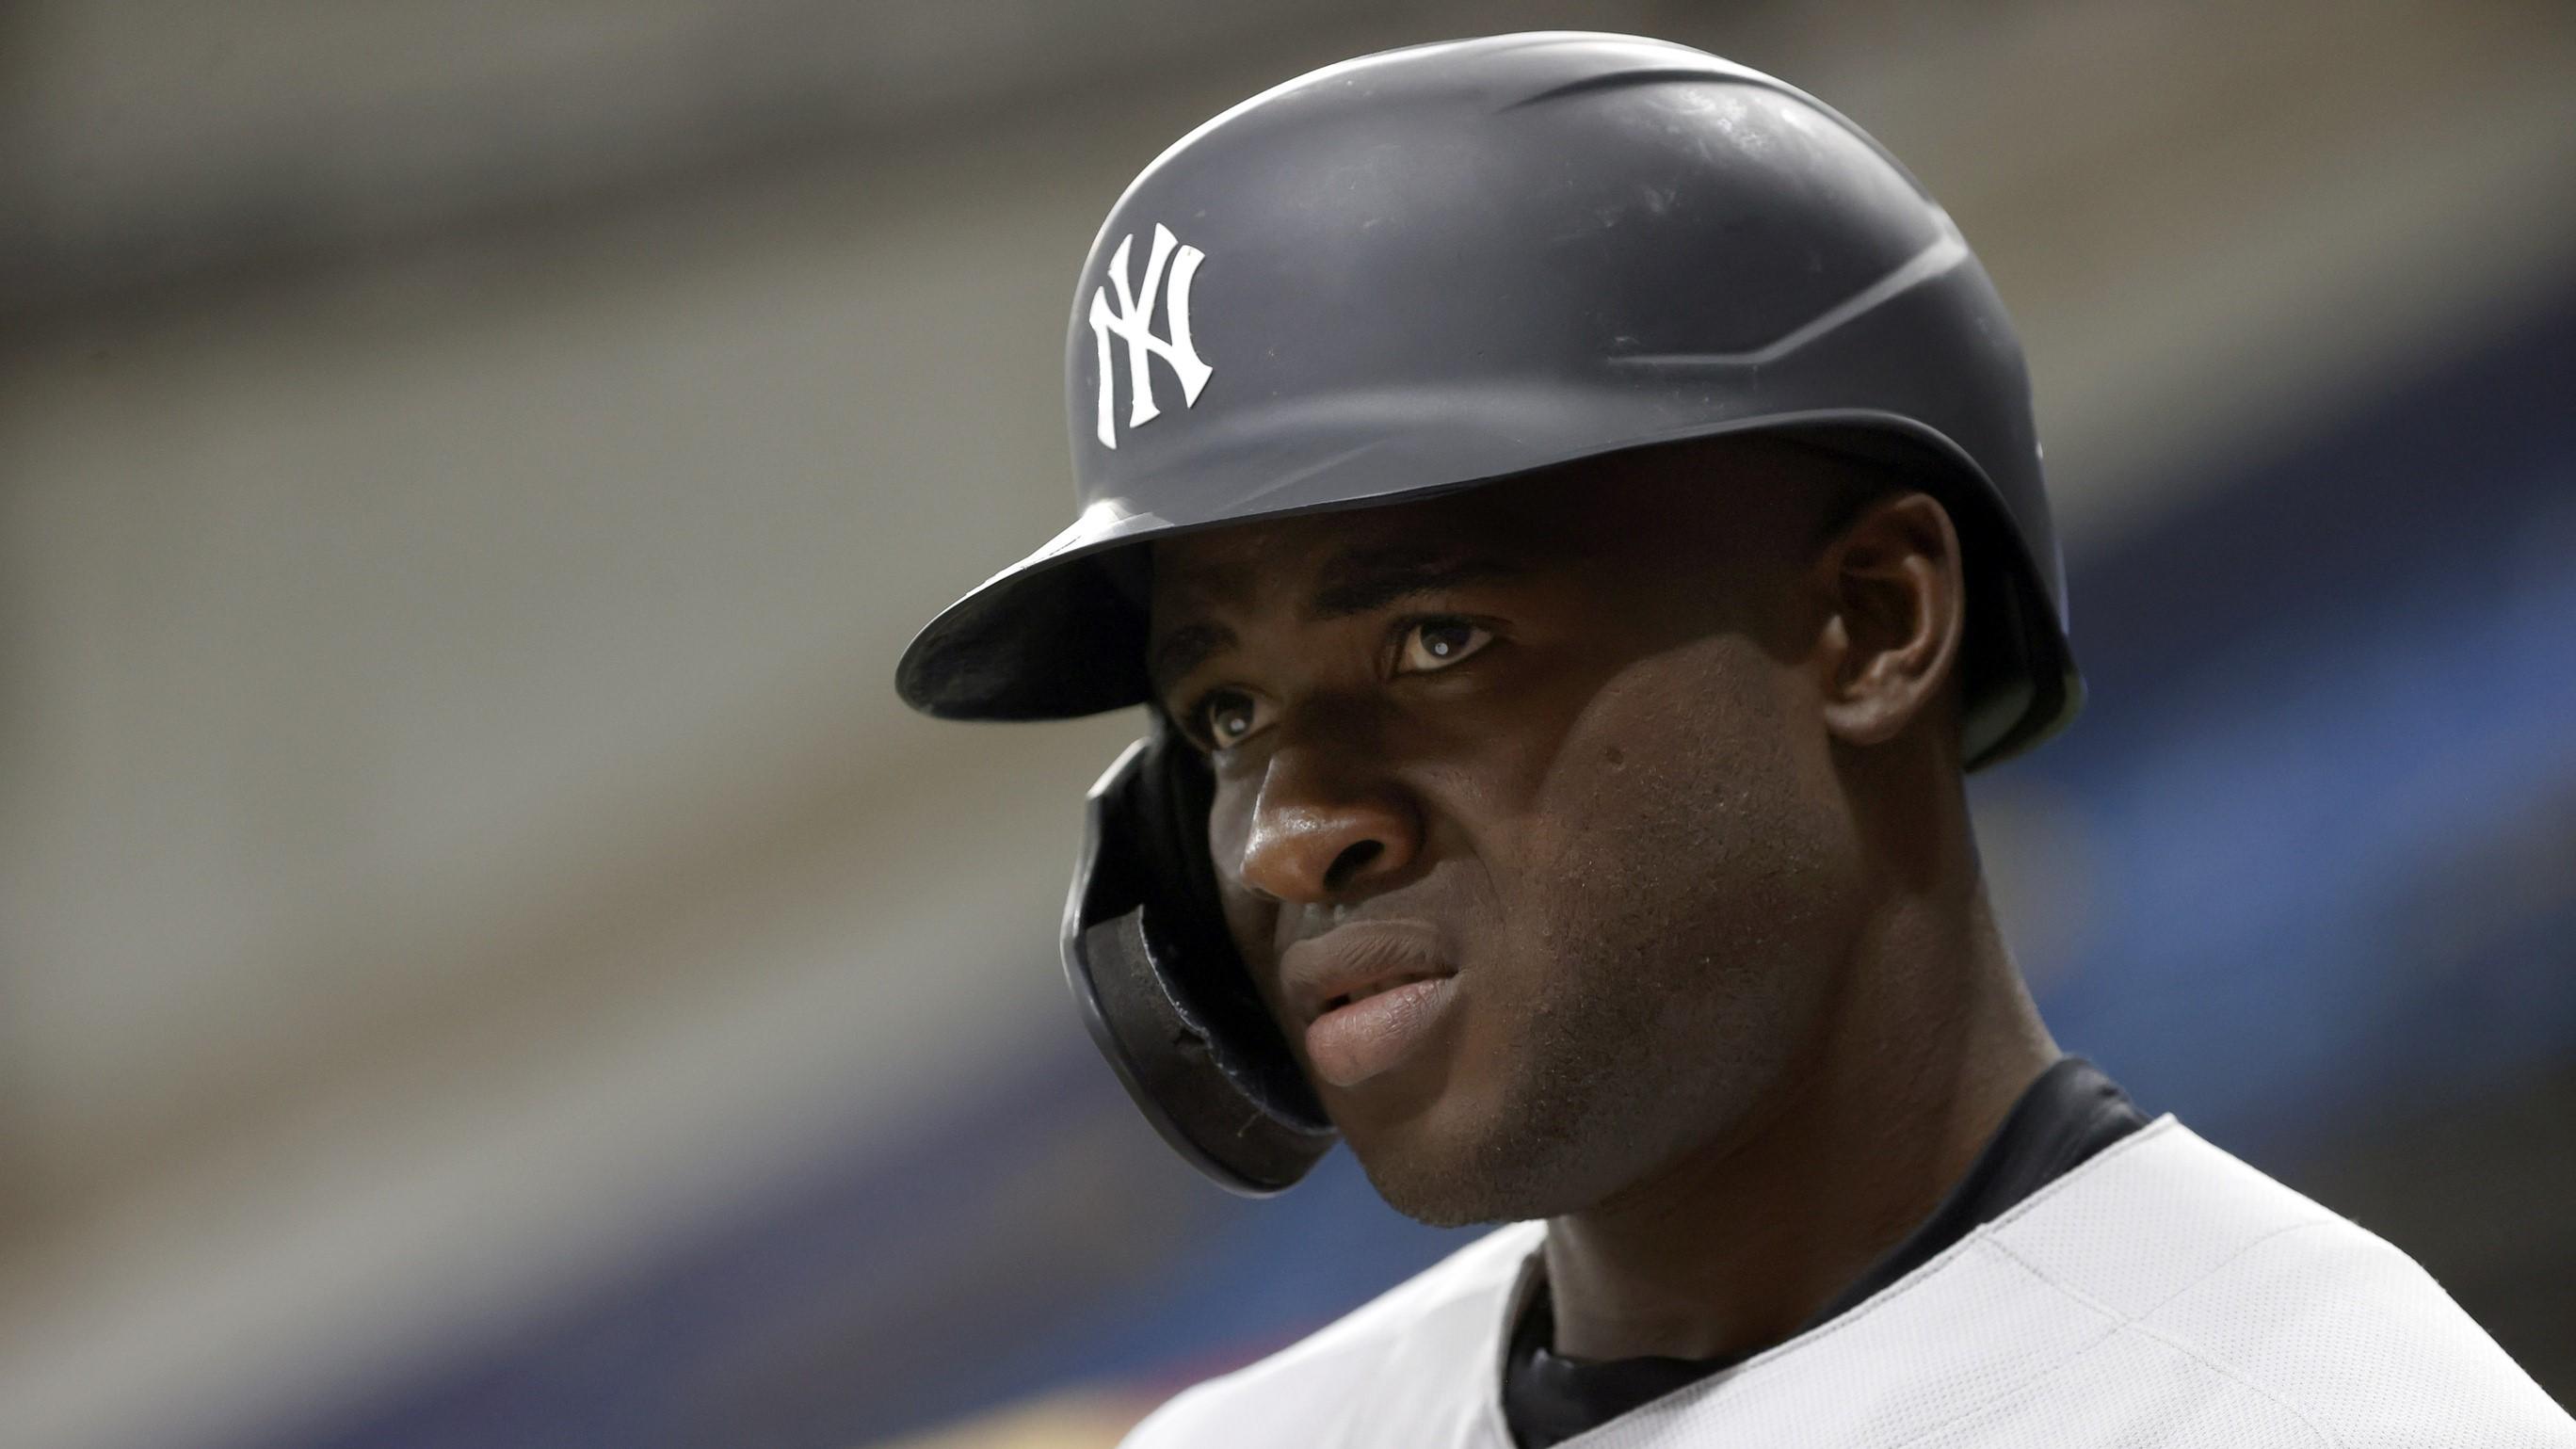 New York Yankees outfielder Estevan Florial (90) looks on during the second inning against the Tampa Bay Rays at Tropicana Field. / Kim Klement-USA TODAY Sports